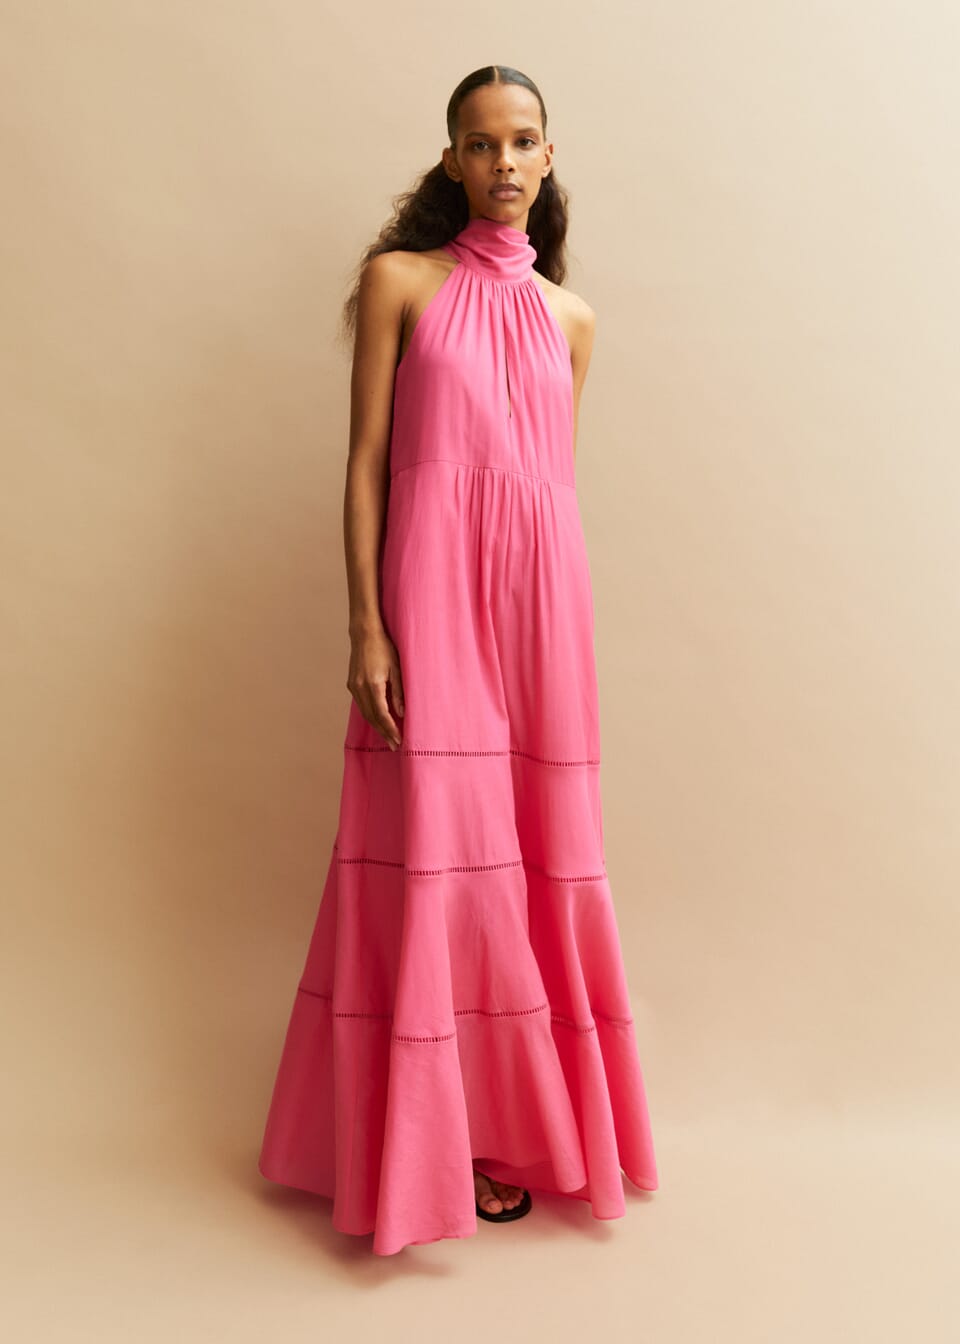 Me + Em pink flowy halterneck maxi dress. Crafted from lightweight cotton voile, this style falls to a flowing, tiered skirt for ease of movement and wear-all-day appeal.